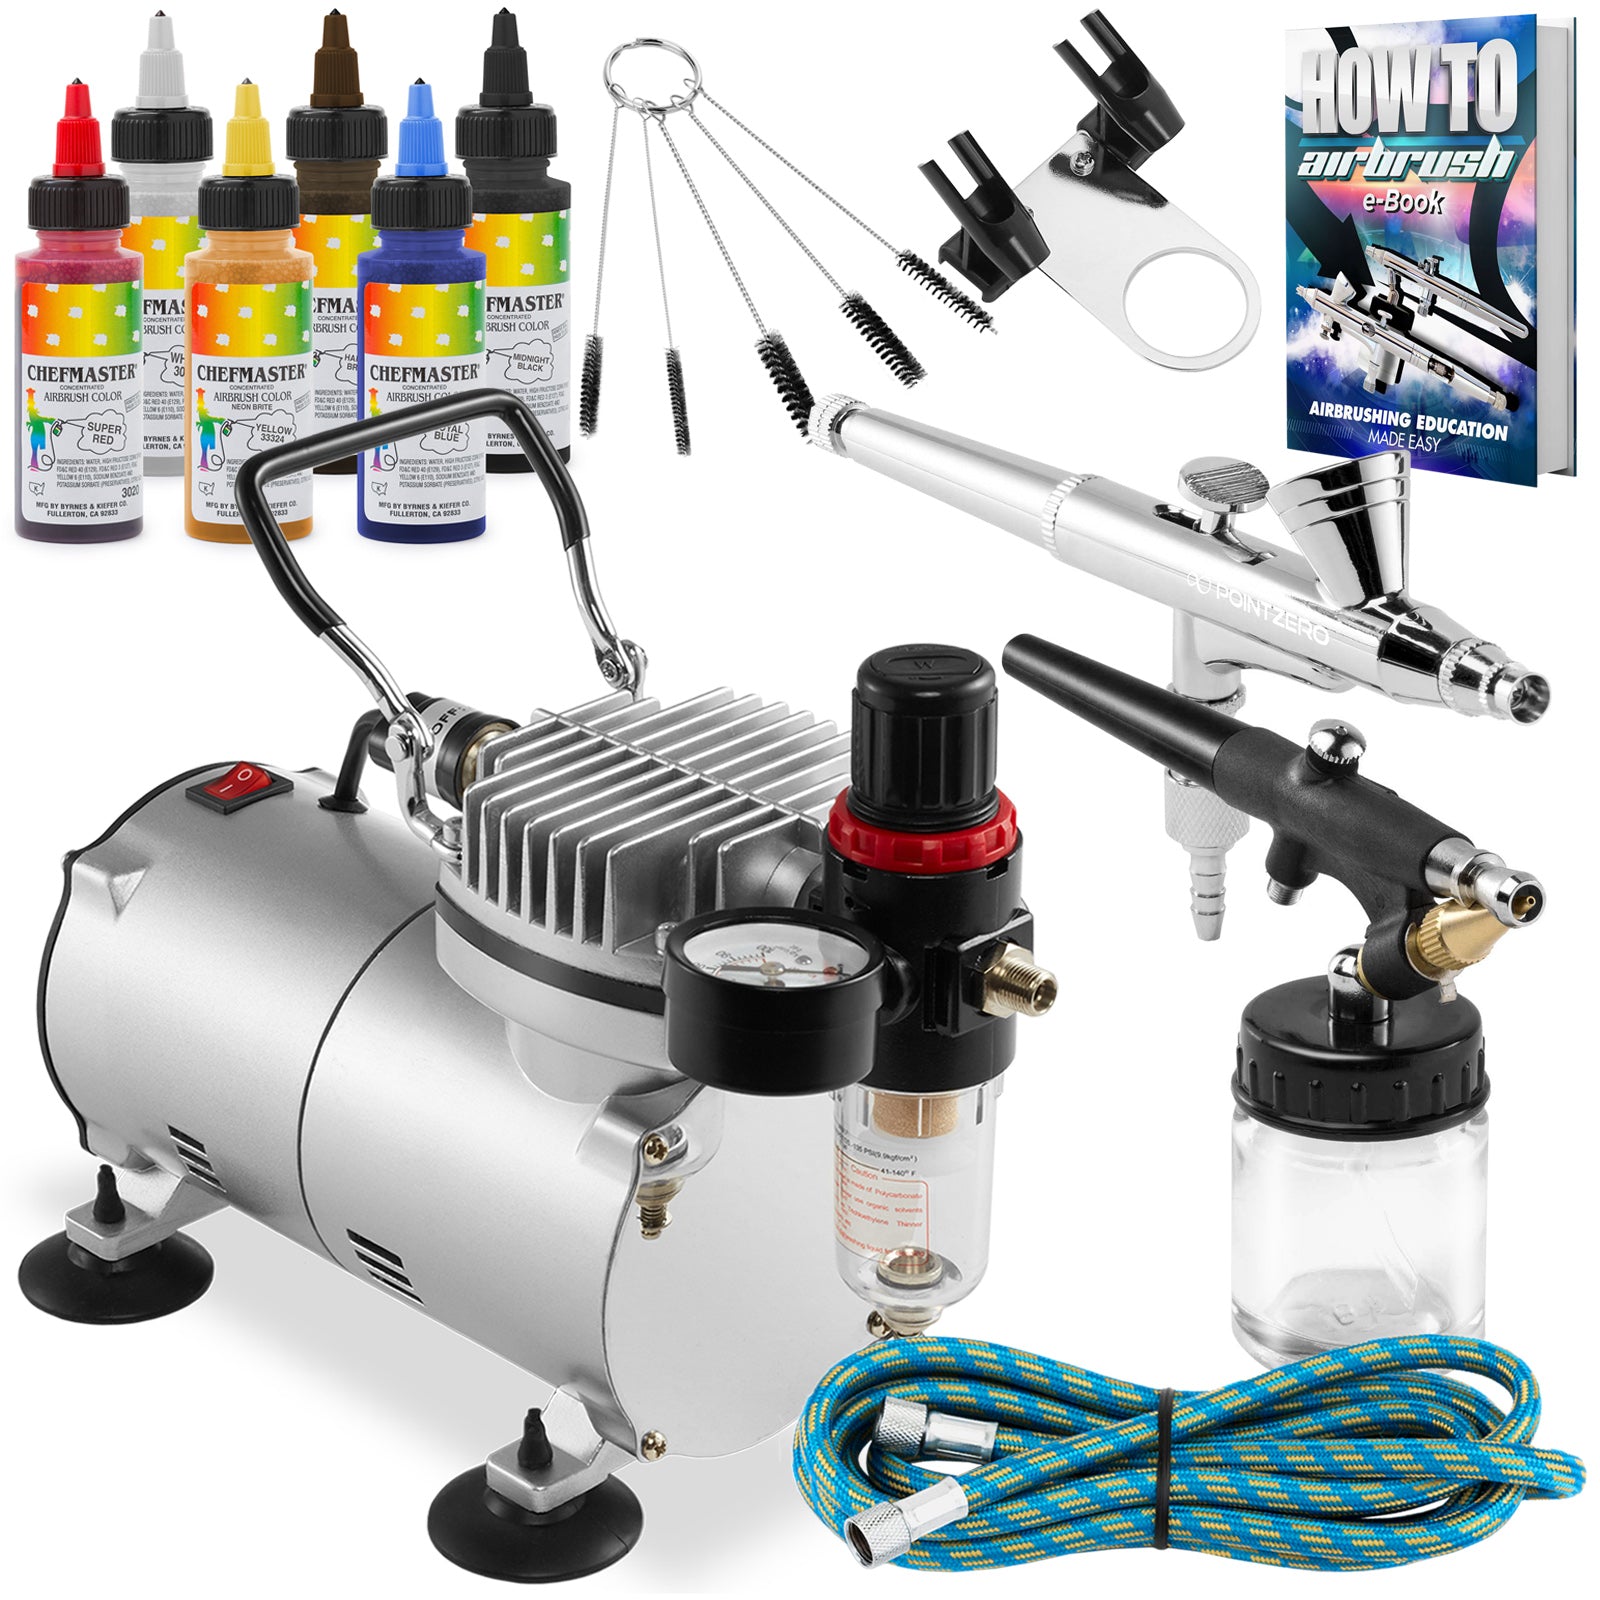 6 Siphon Feed Airbrushes, 6 Station Holder, Manifold, Hoses